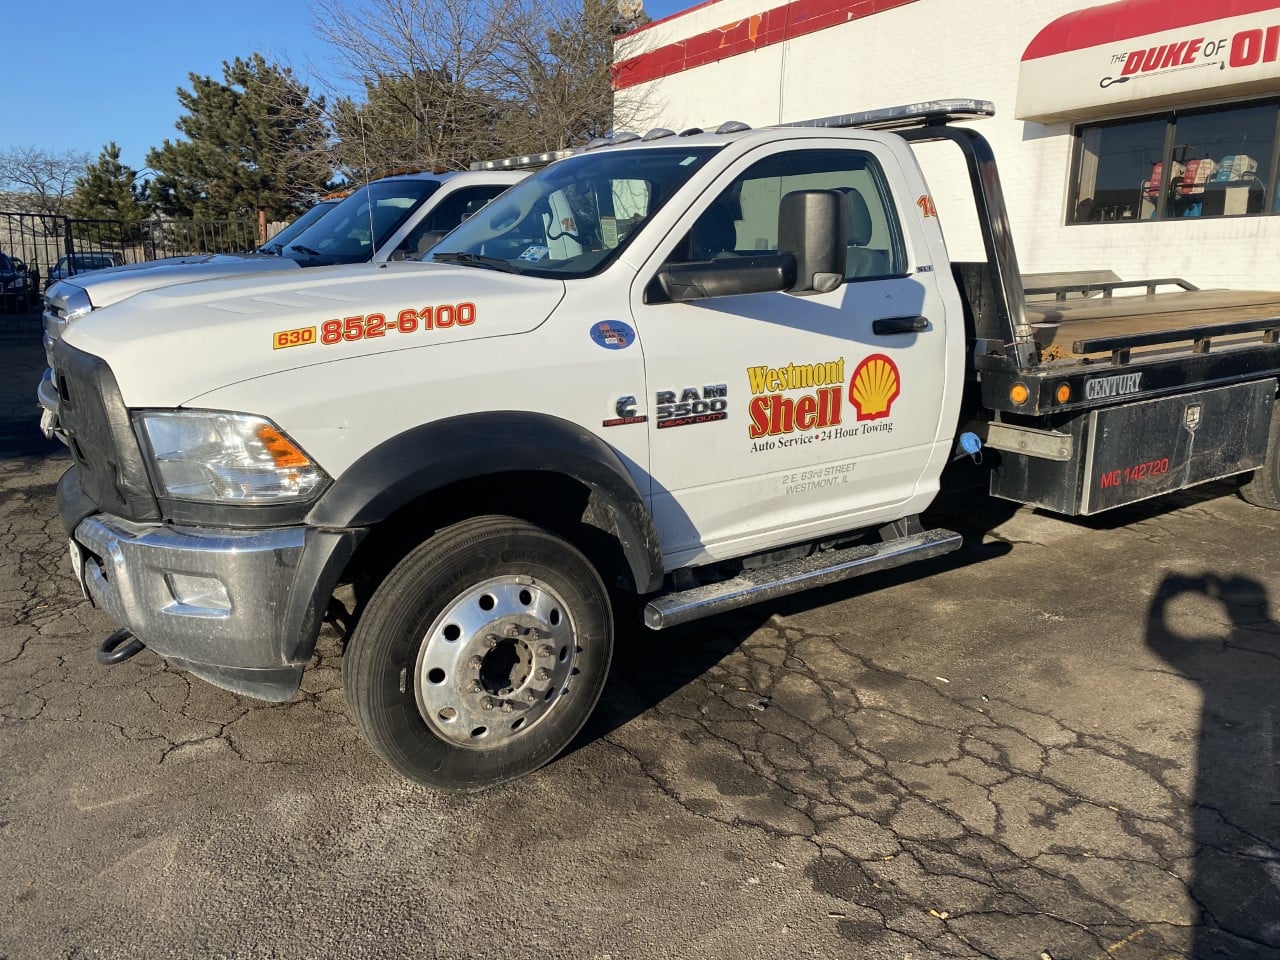 Westmont Shell Auto Service, US, 24 hr towing